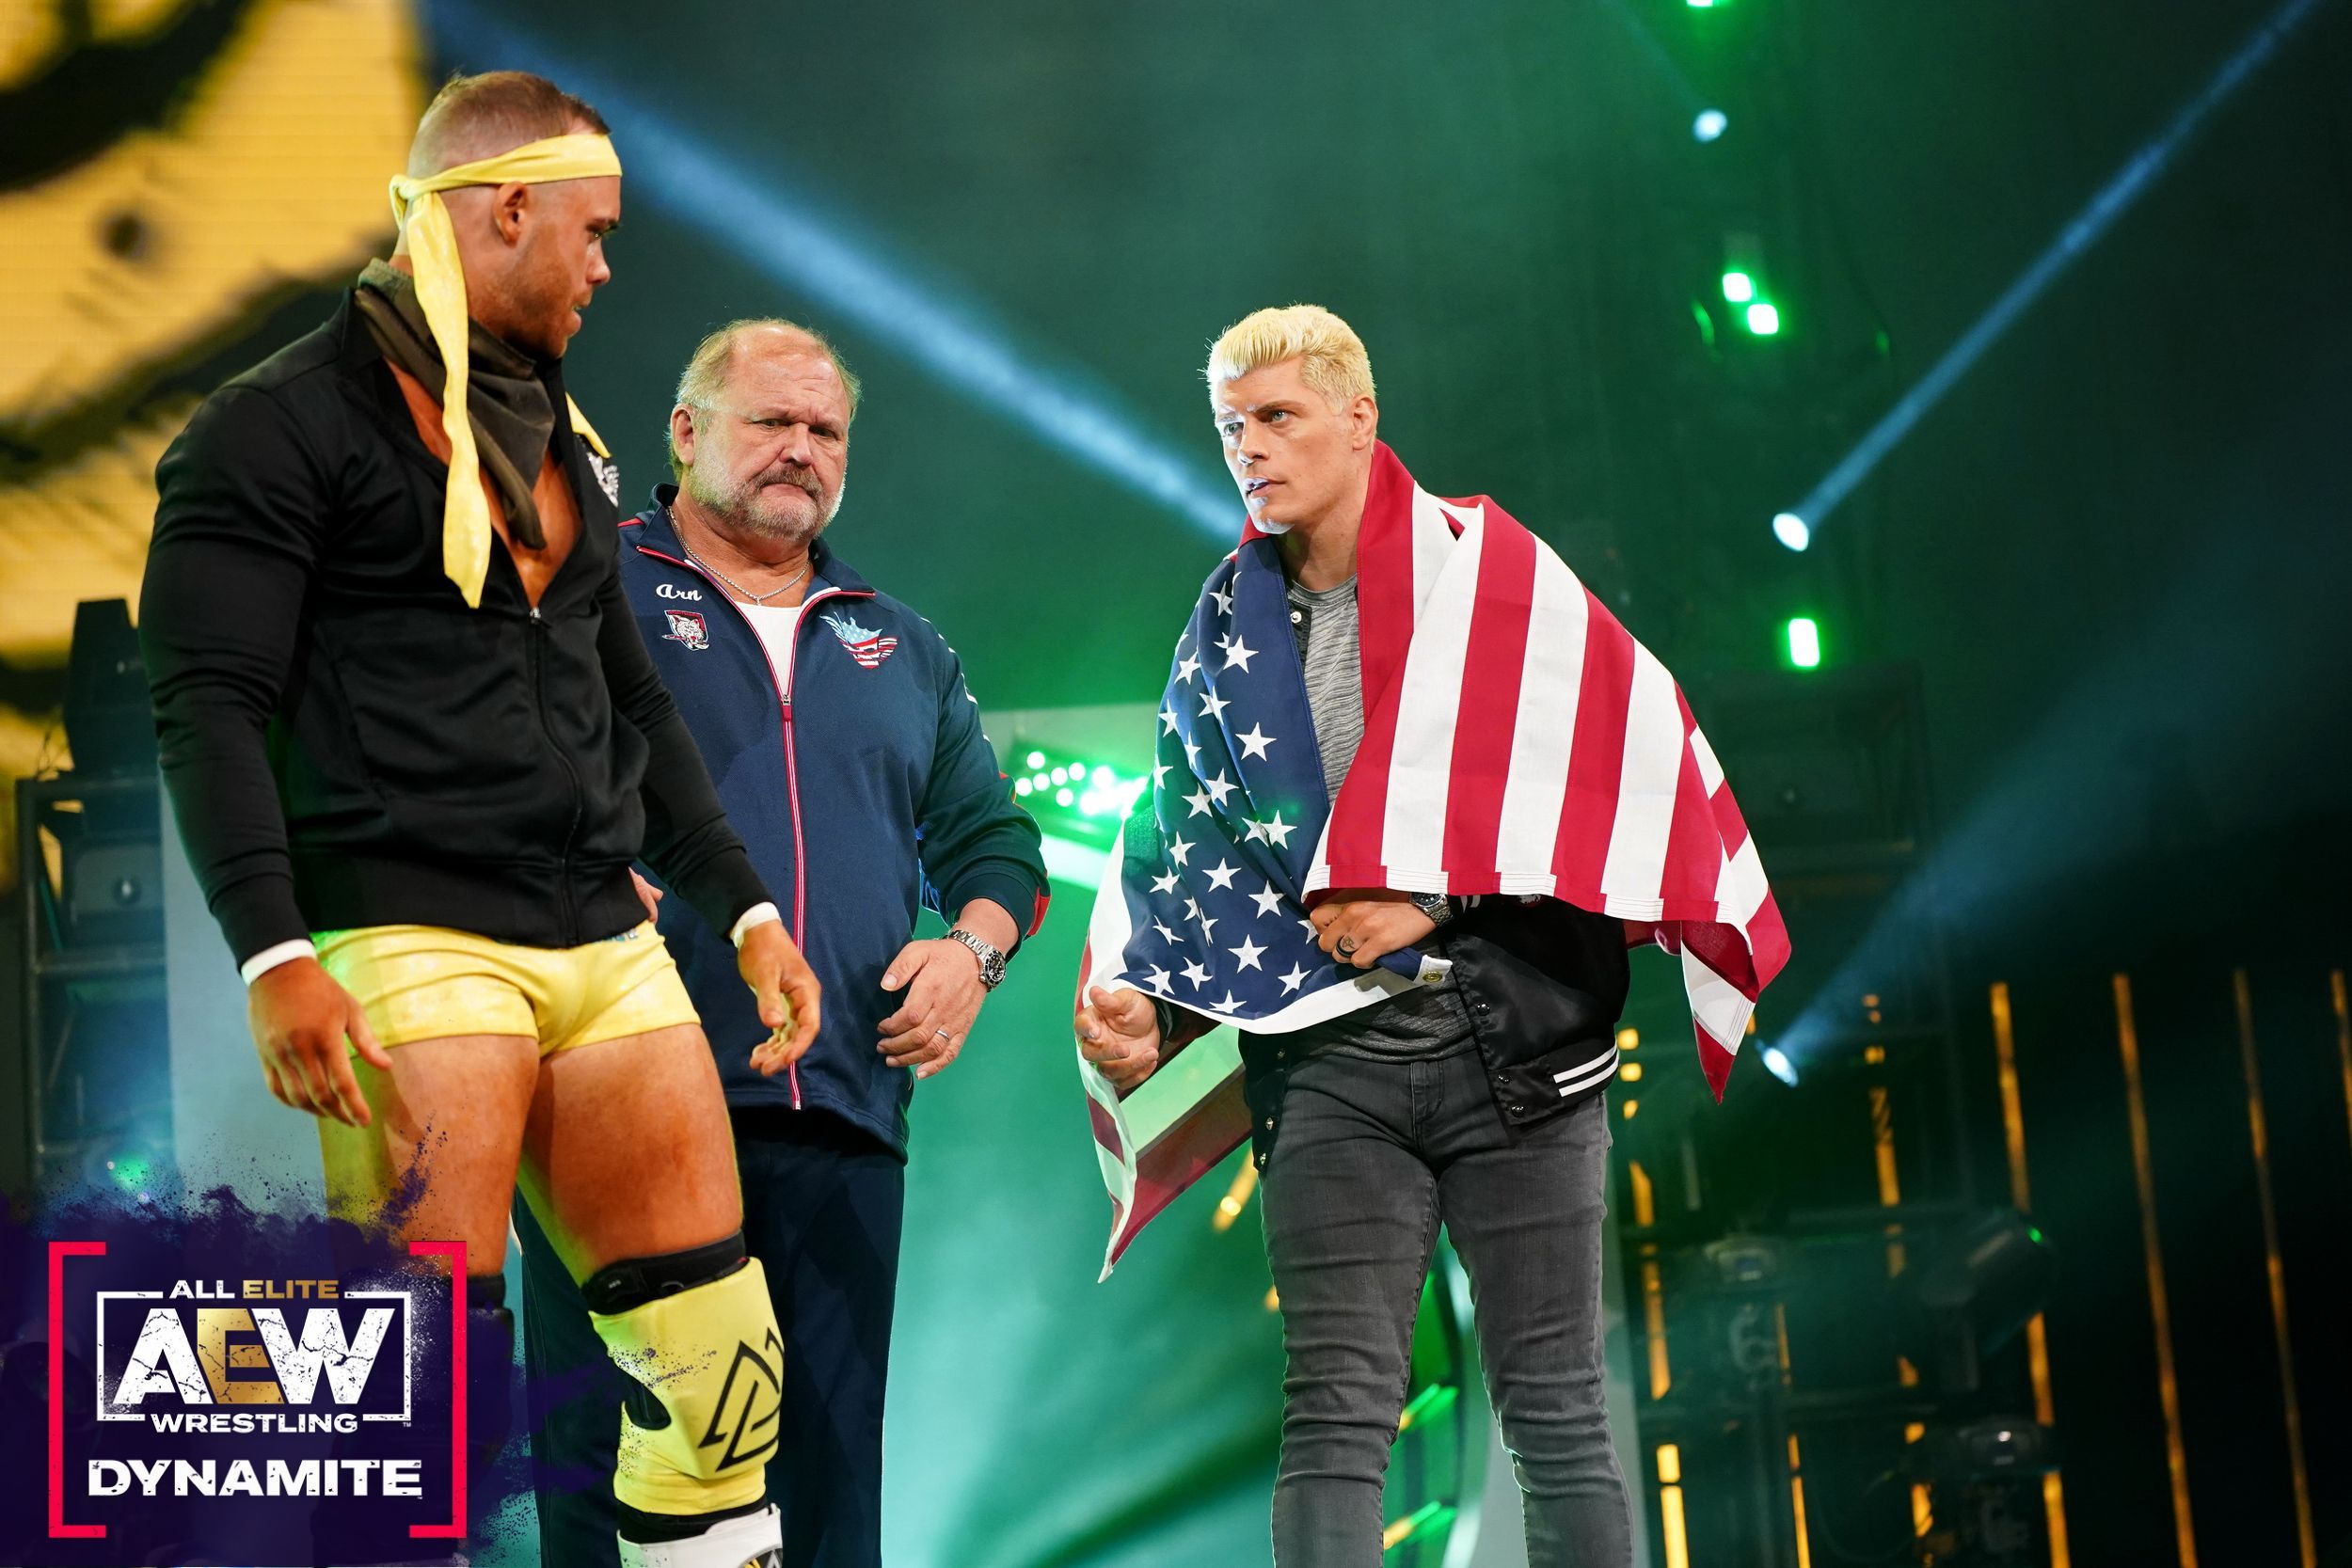 cody rhodes drapes himself in the American flag as he accompanies Austin Gunn to the ring alongside Arn Anderson on Dynamite